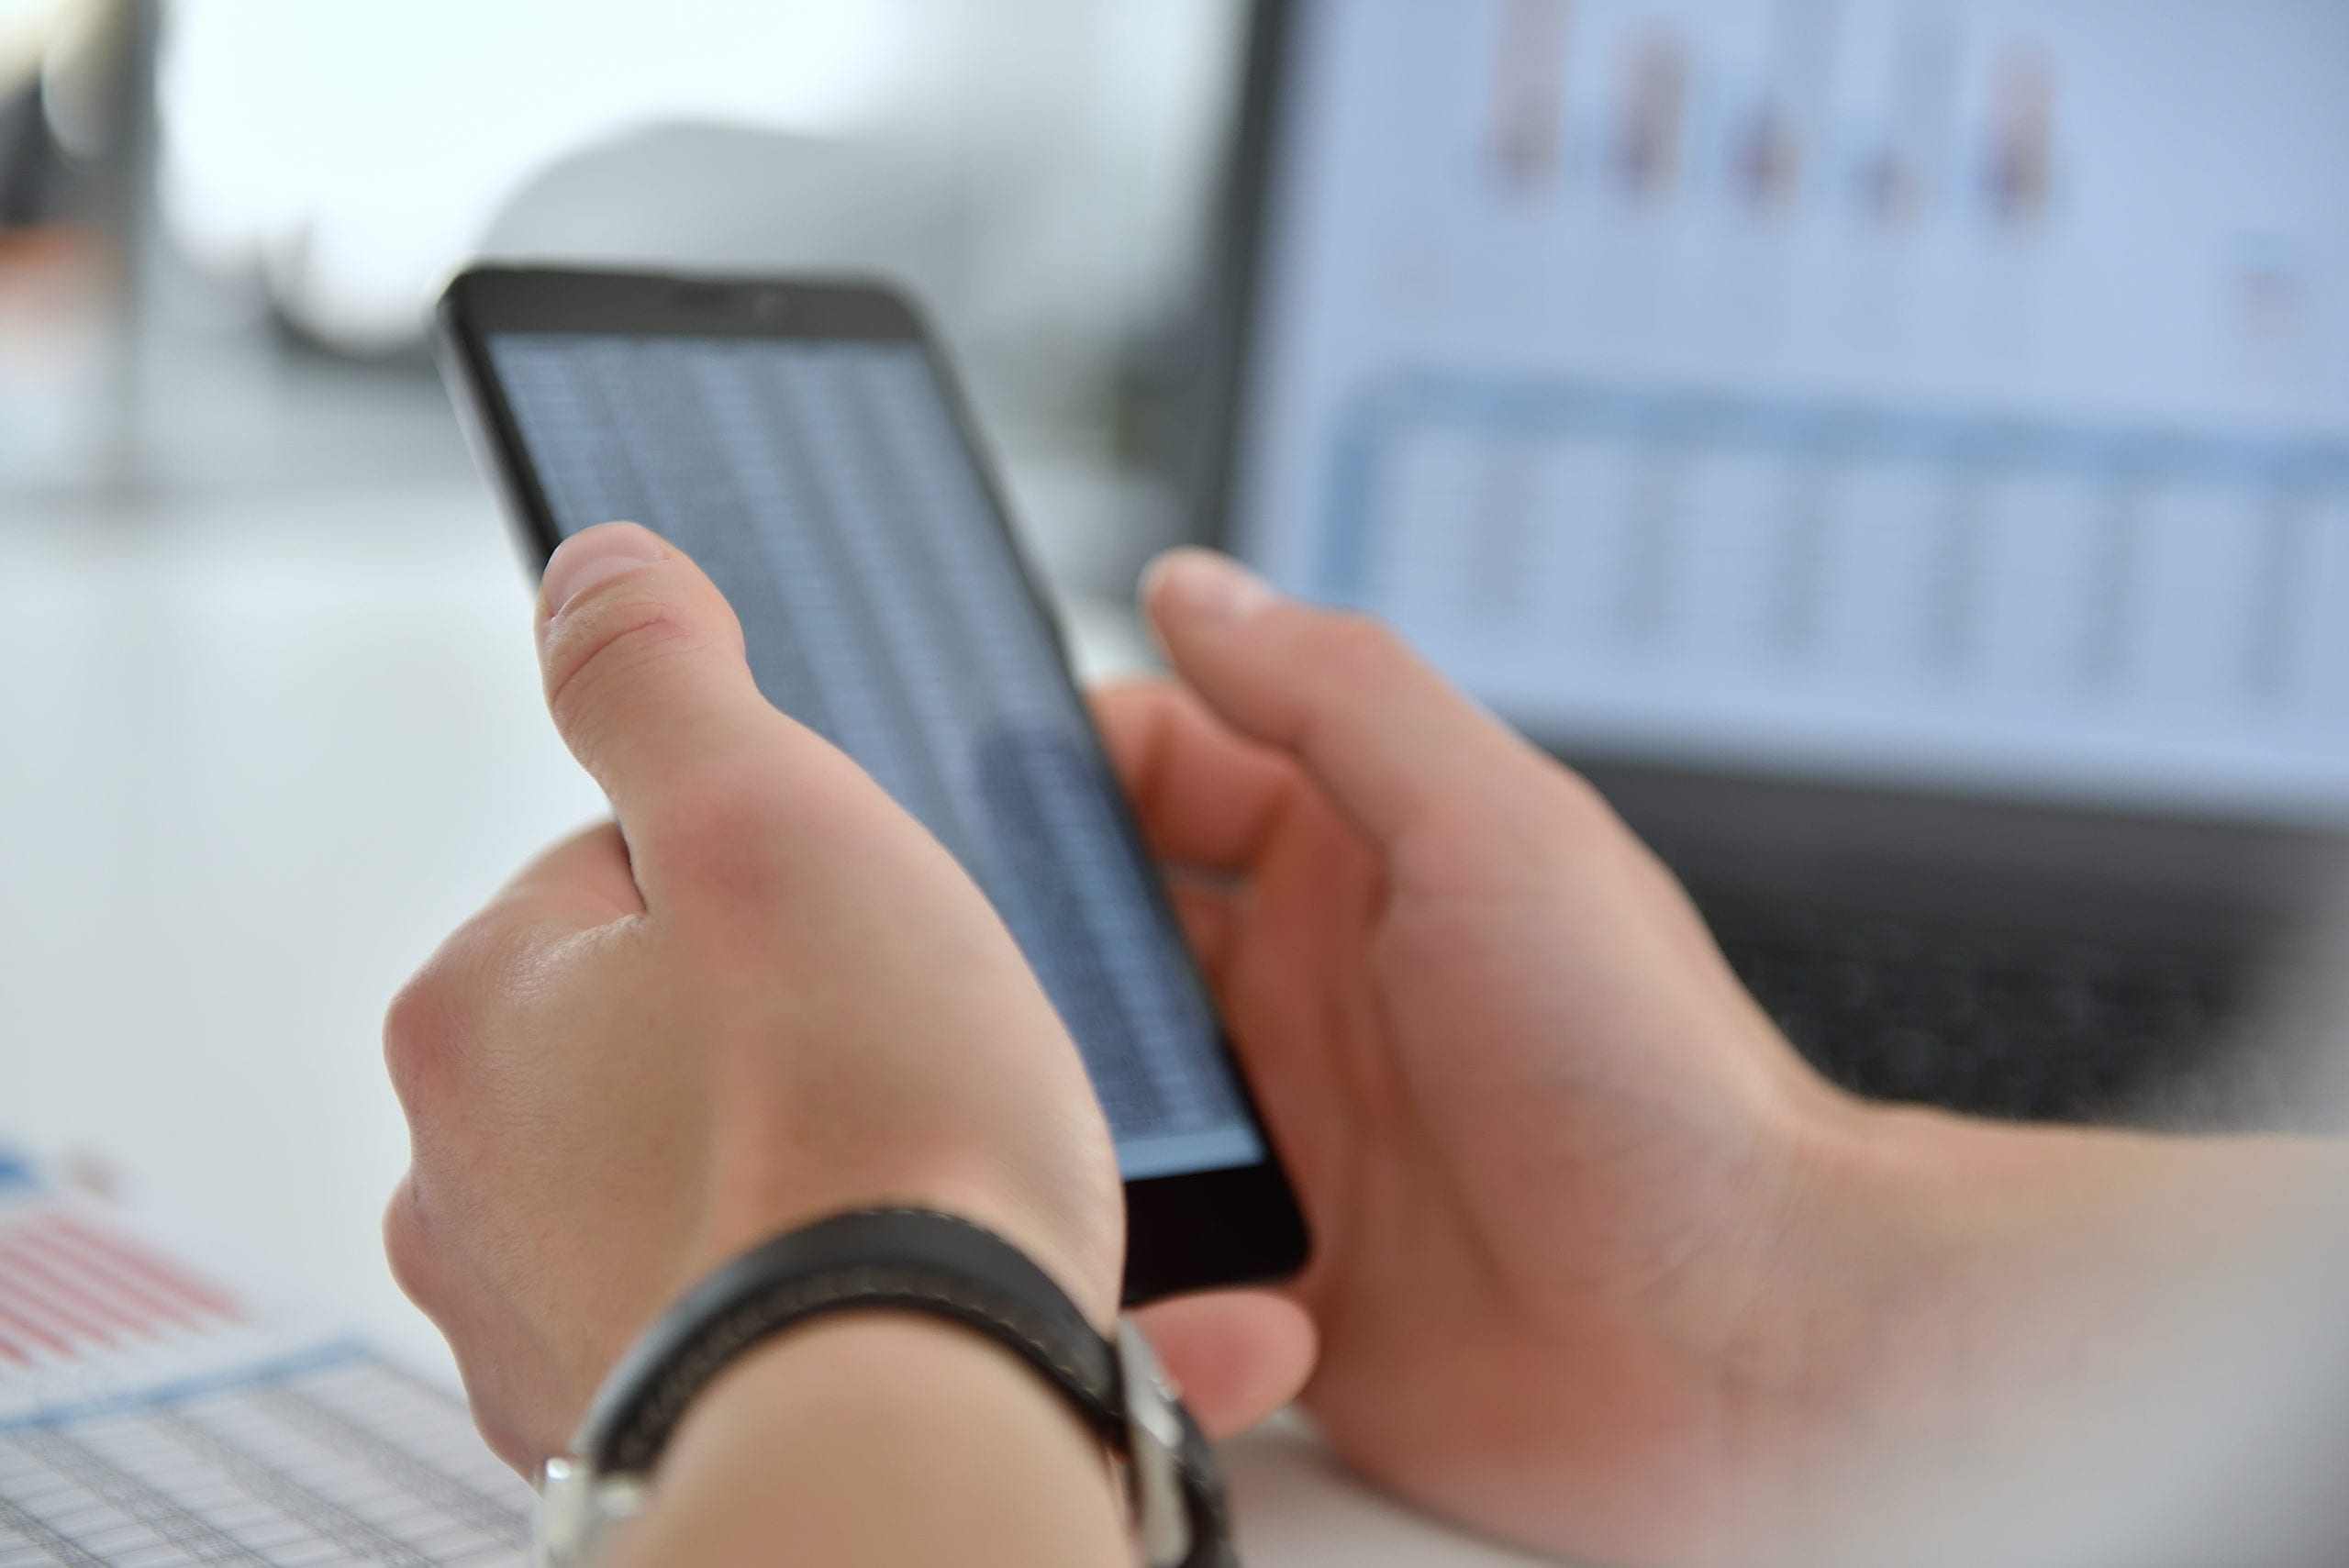 How Accounting Firms Can Leverage the New Microsoft Lists App